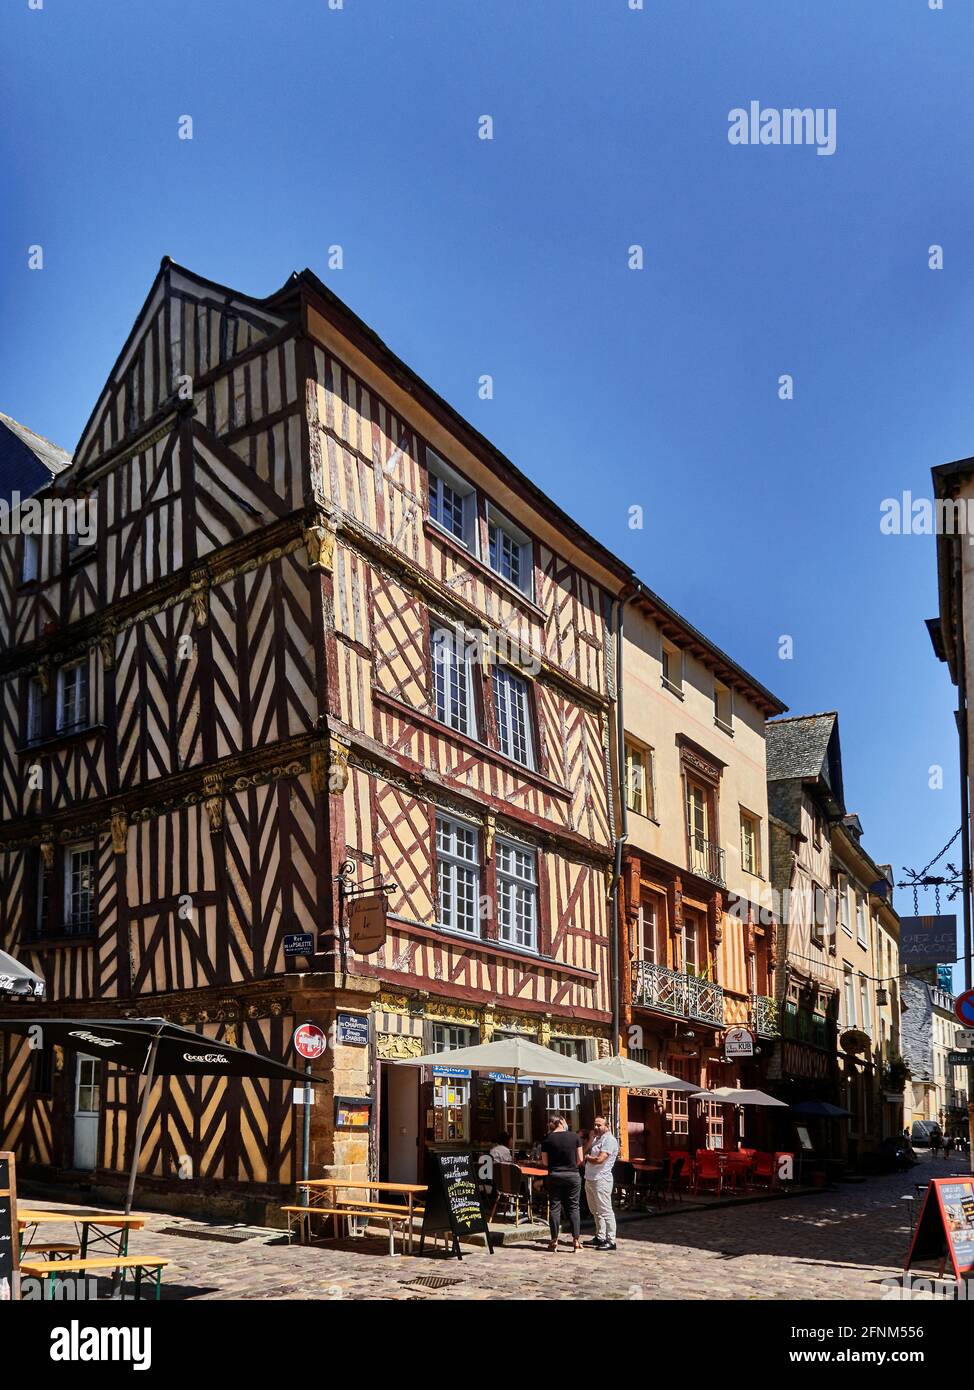 France. Rennes; city; Ille-et-Vilaine department, Brittany. In chapter street, tables are set in the pedestrian street for a drink or a meal. Tourists Stock Photo